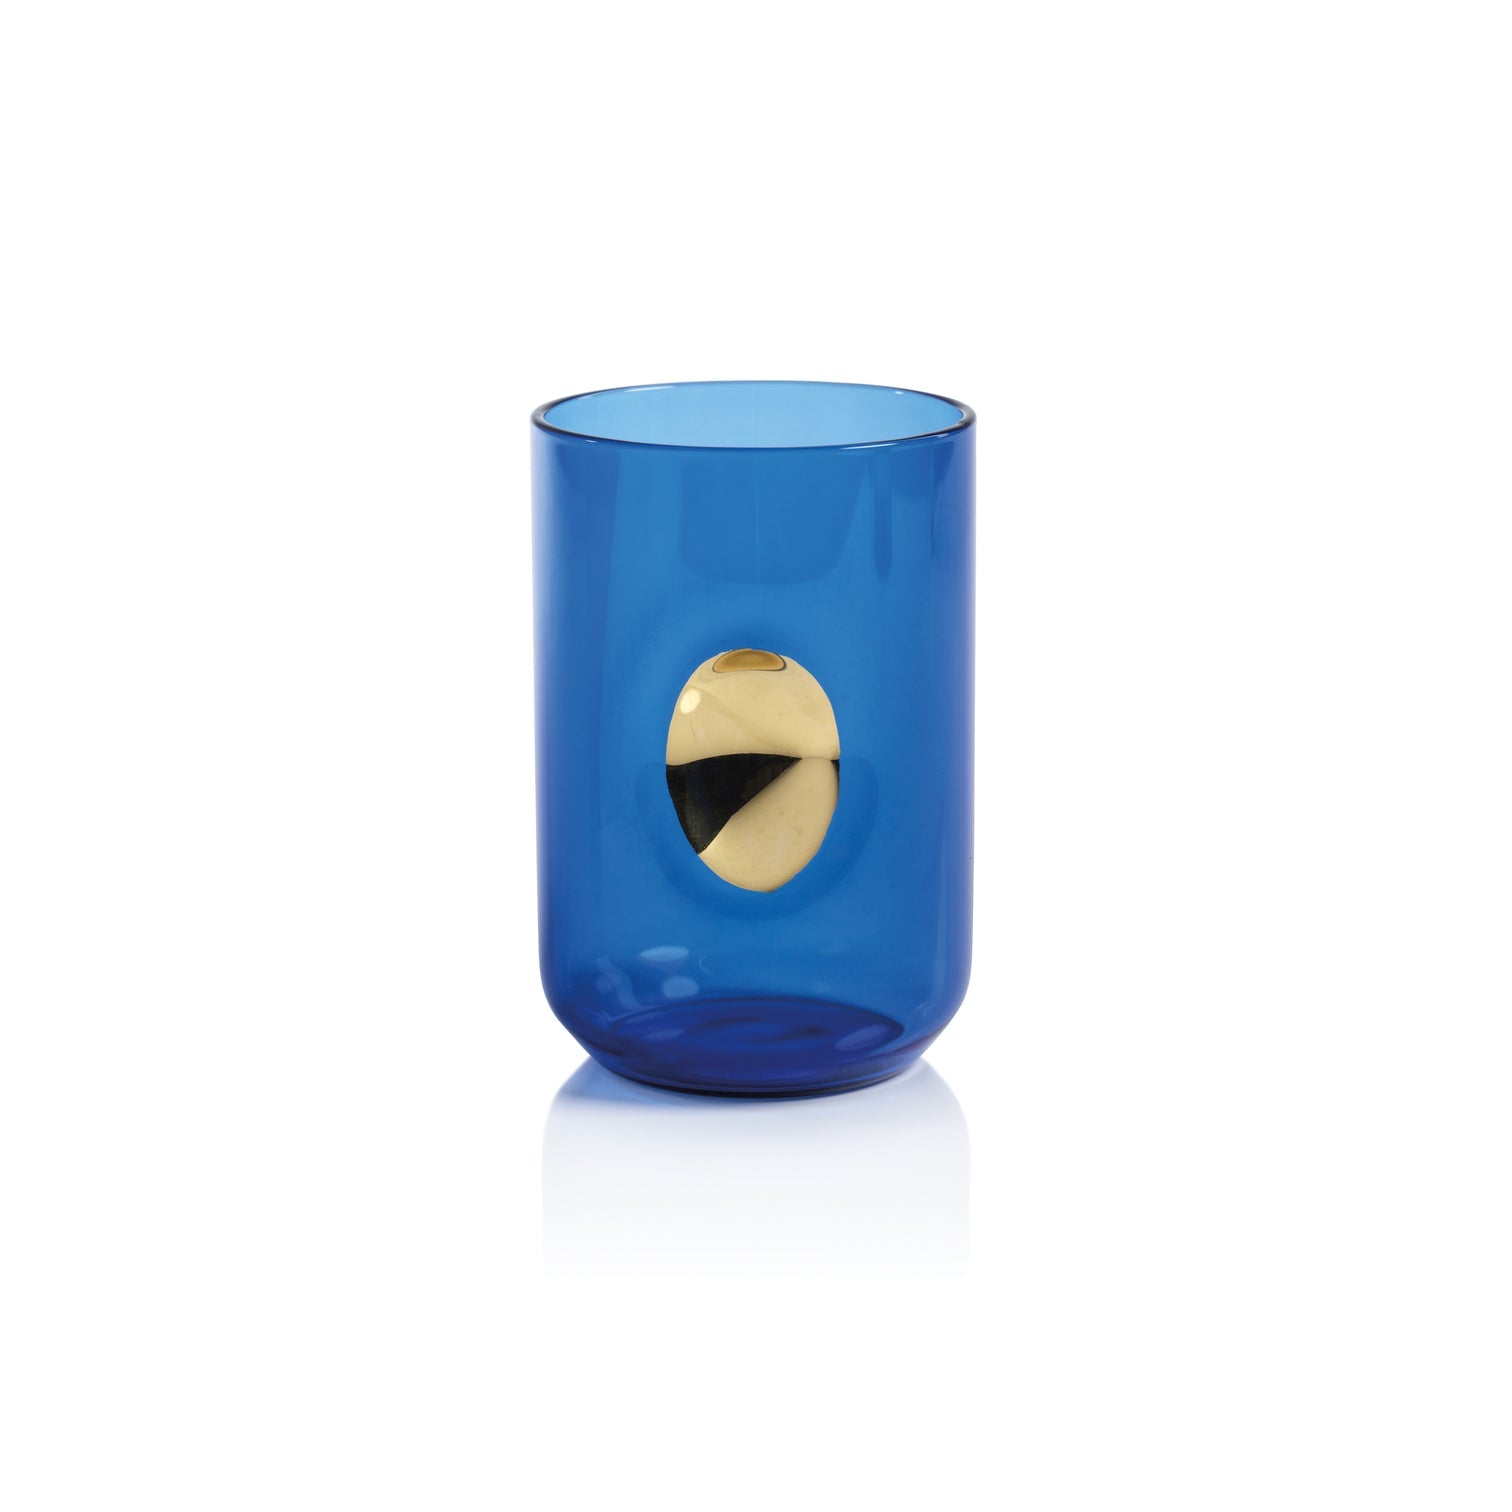 Aperitivo Tumbler with Gold Accent - Cobalt Blue - Set of 4